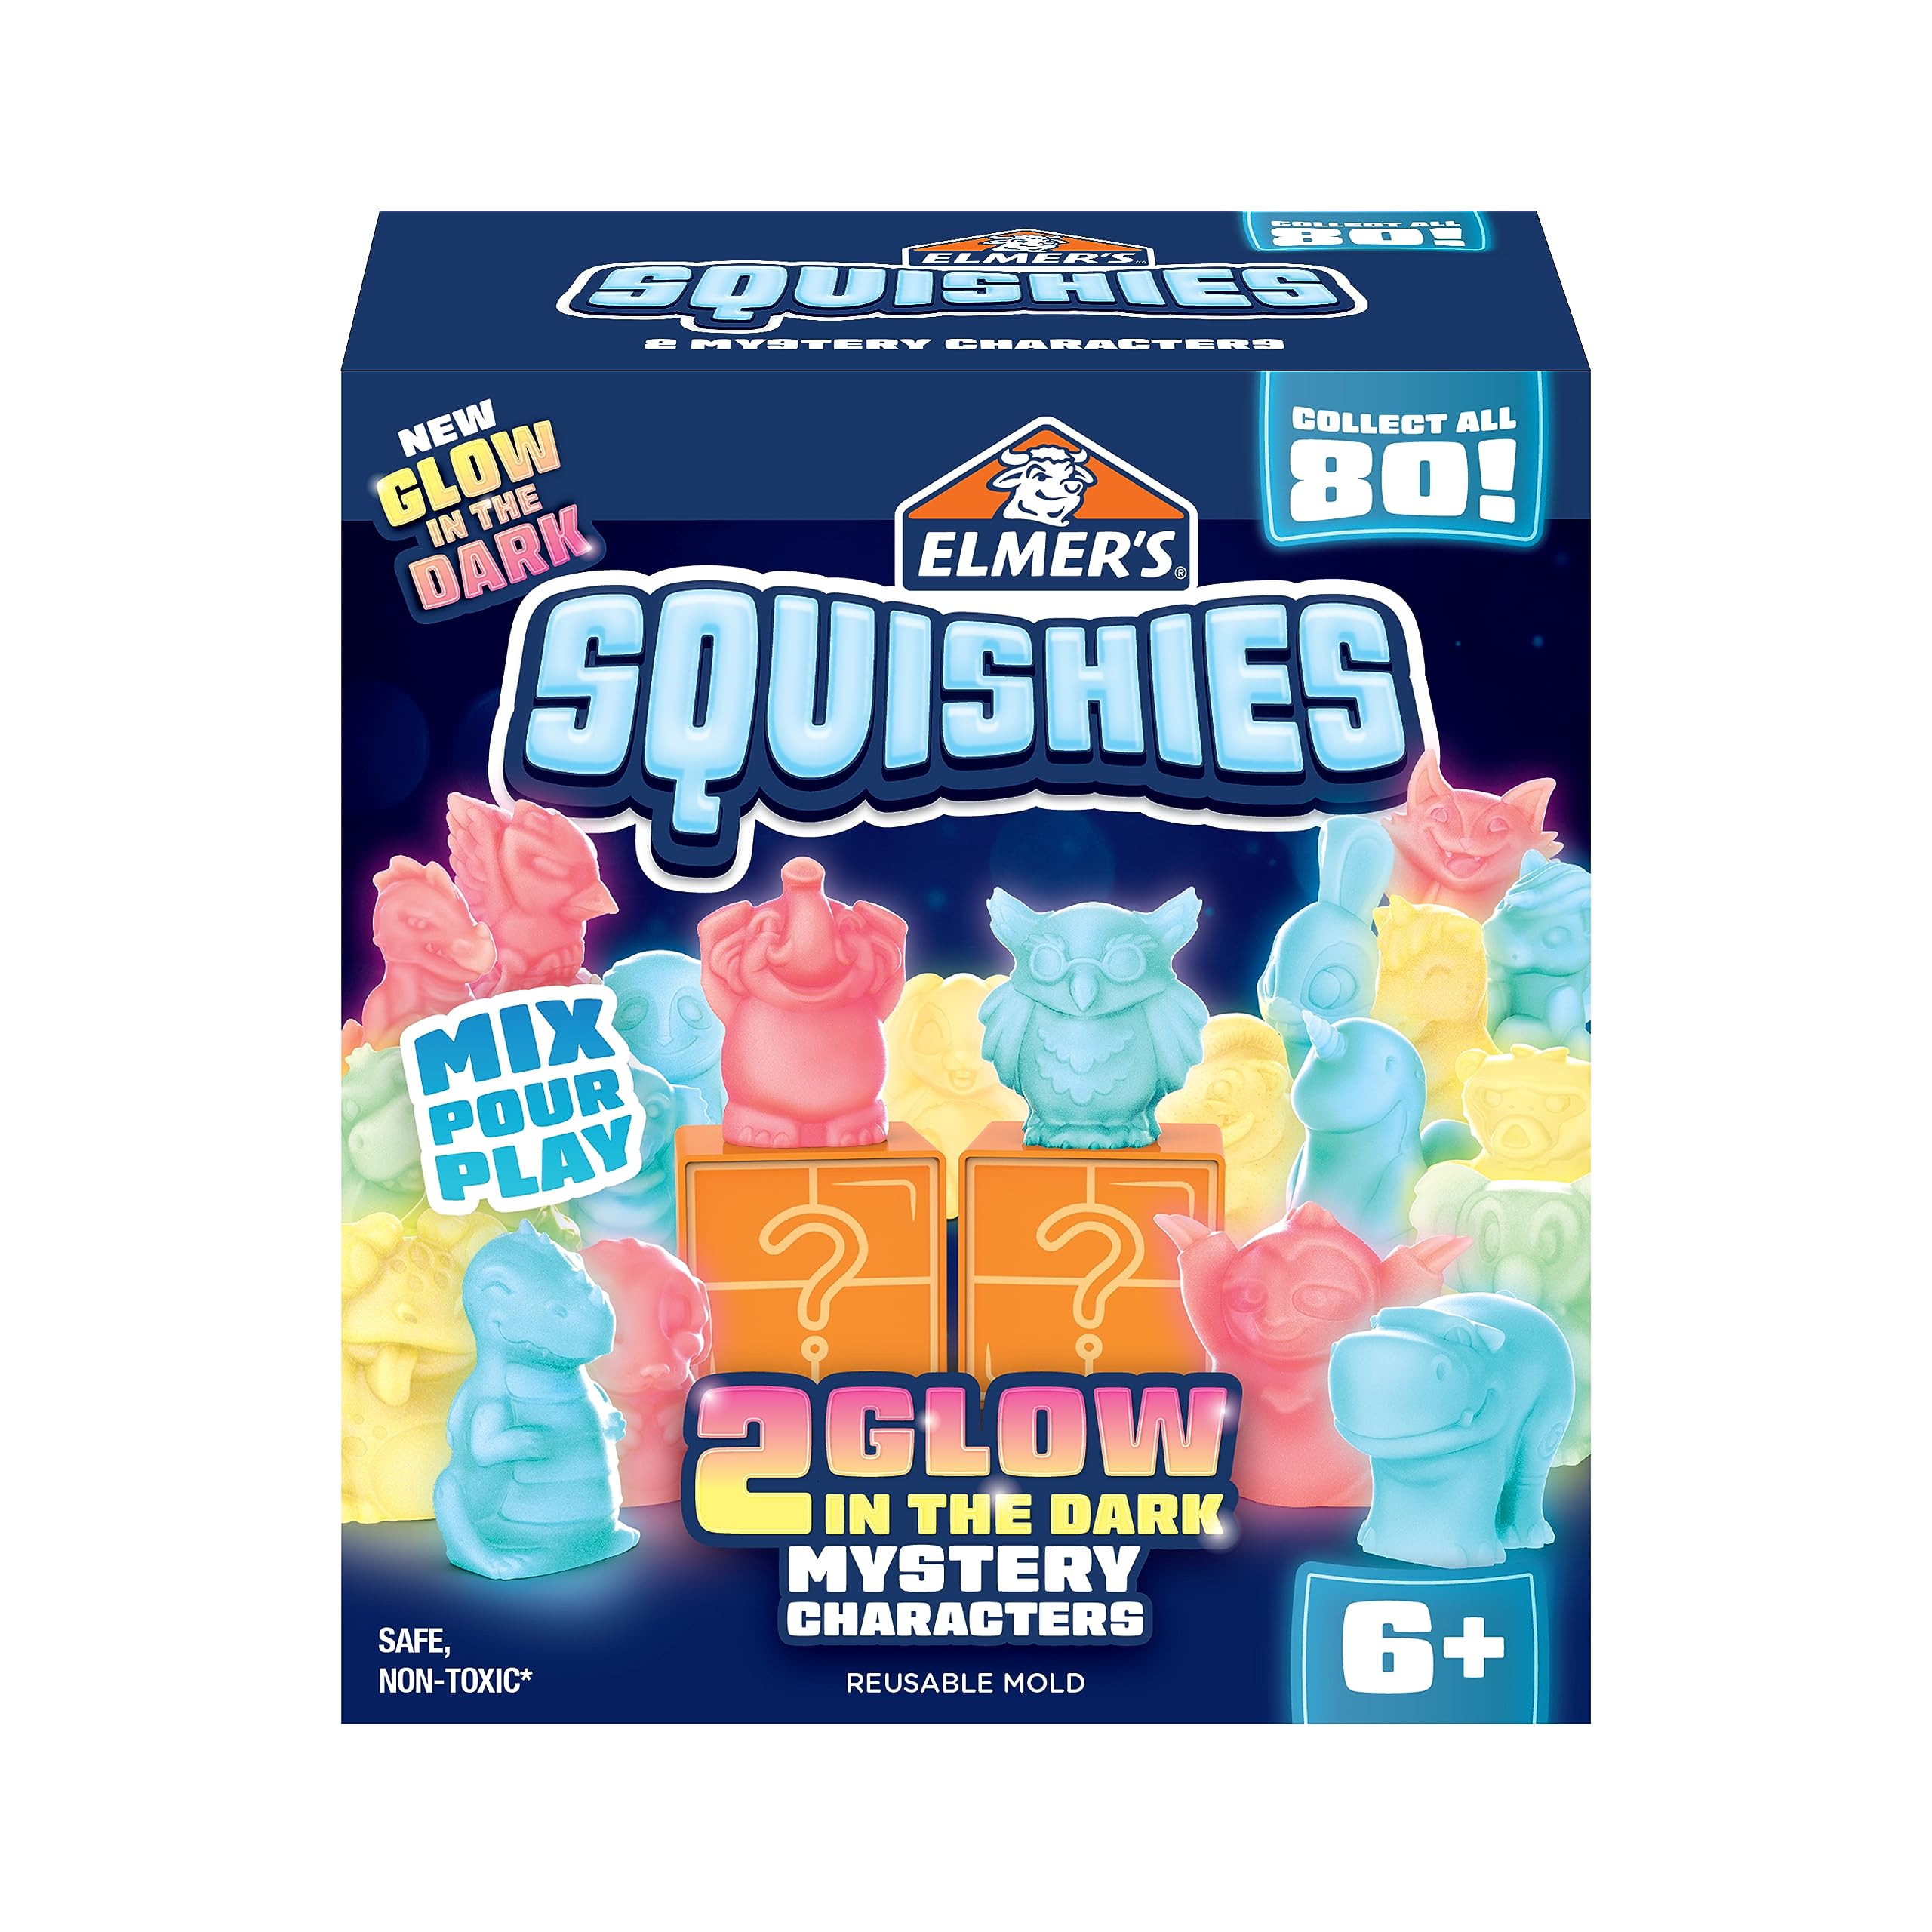 Elmer's Squishies Kids’ Activity Kit, DIY Glow in The Dark Squishy Toy Kit Creates 2 Mystery Characters, 13 Piece Kit